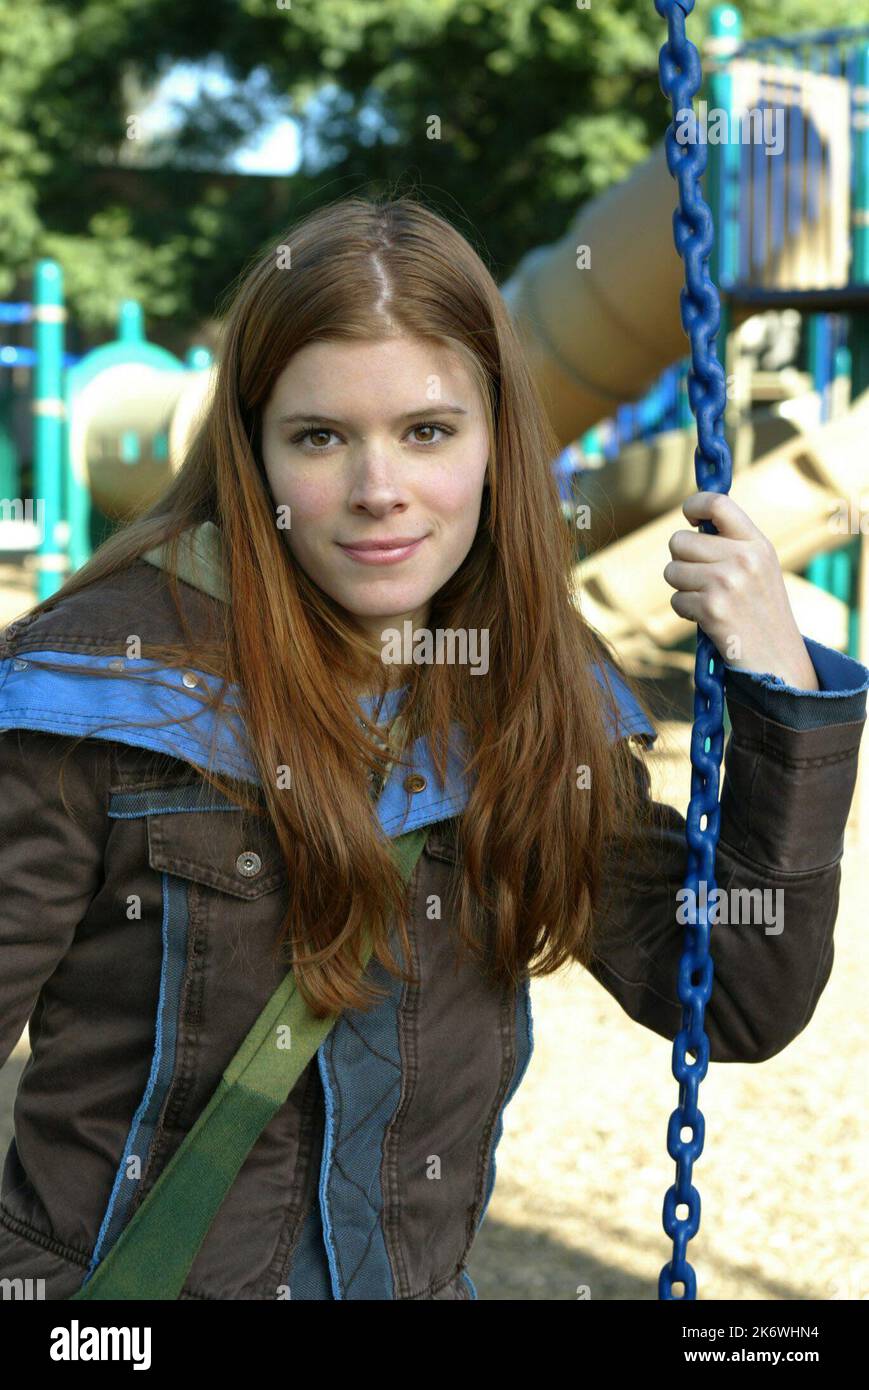 KATE MARA in JACK & BOBBY (2004), directed by PERRY LANG, MICHAEL SCHULTZ, DAVID NUTTER and PETER MARKLE. Credit: WARNER BROS. TELEVISION / Album Stock Photo